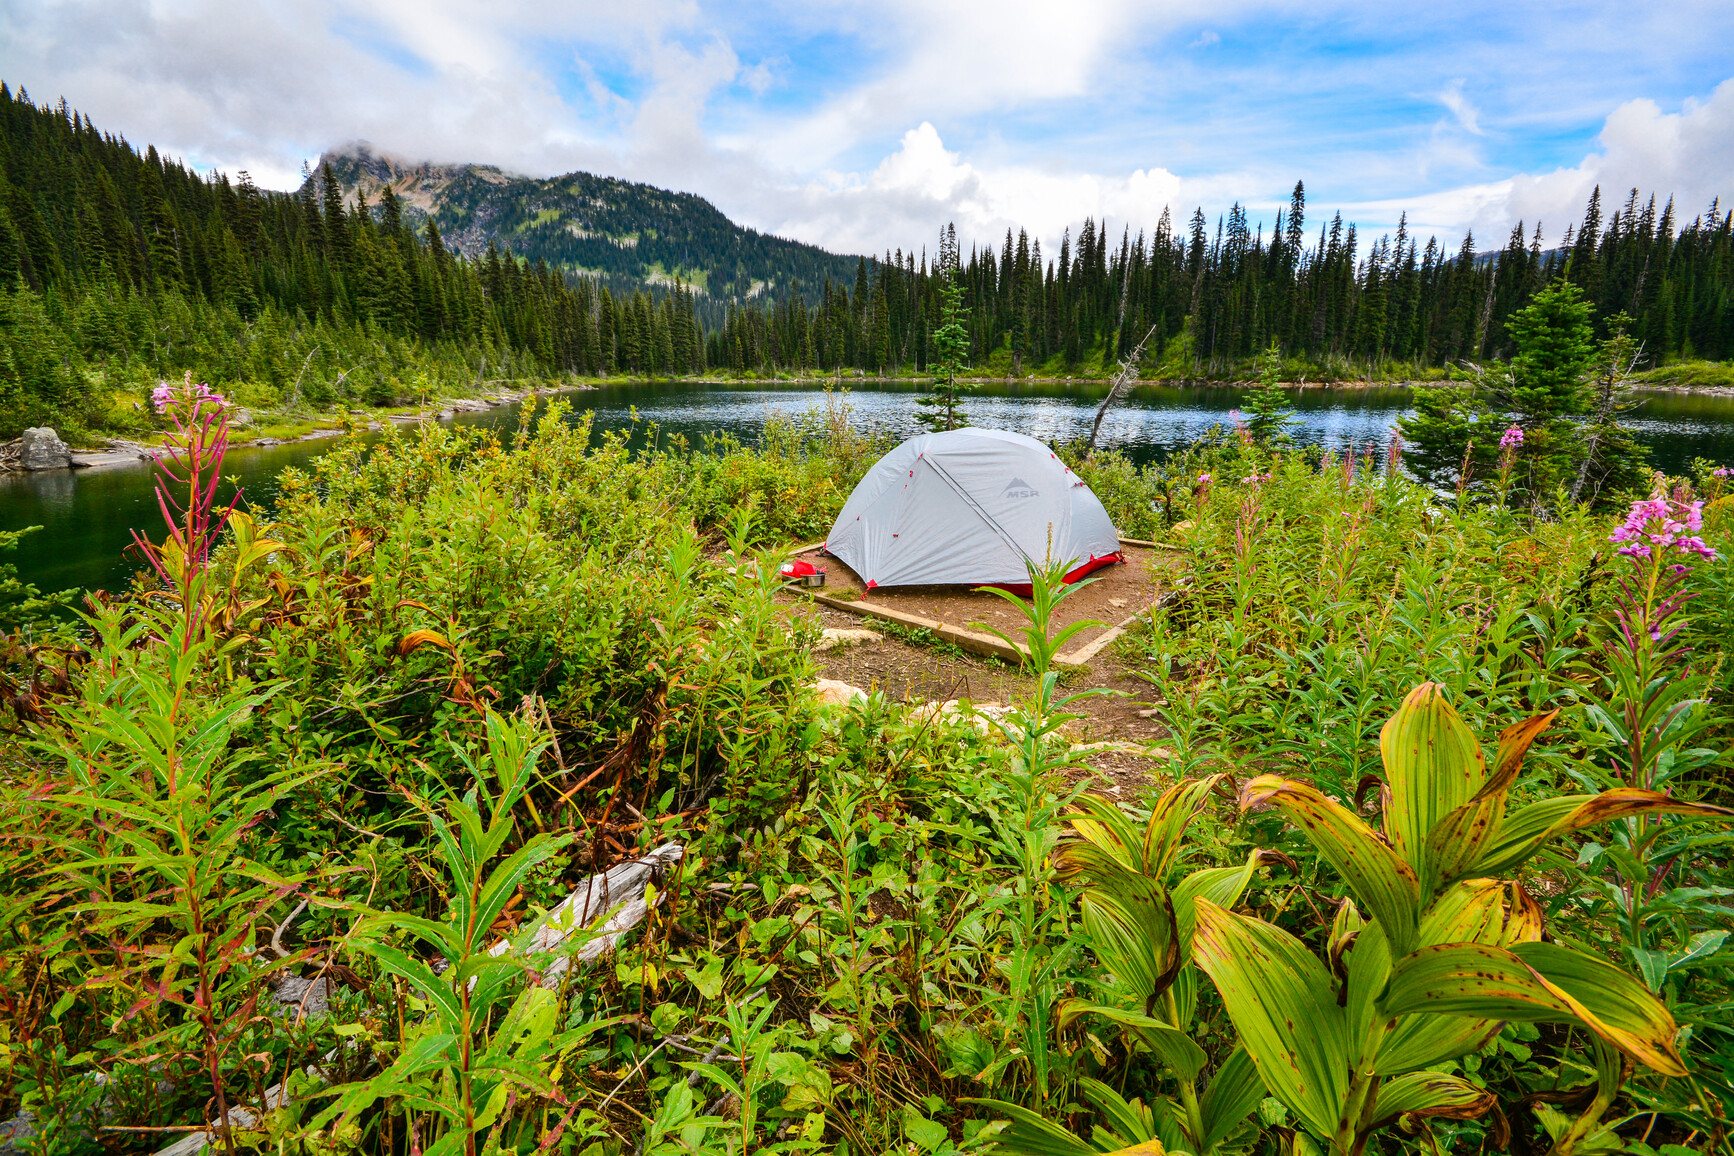 Photo of a tent set up on a tent pad by a lake. Tall shrubs and wildflowers surround the tent pad. Across the small lake is forest and mountains.